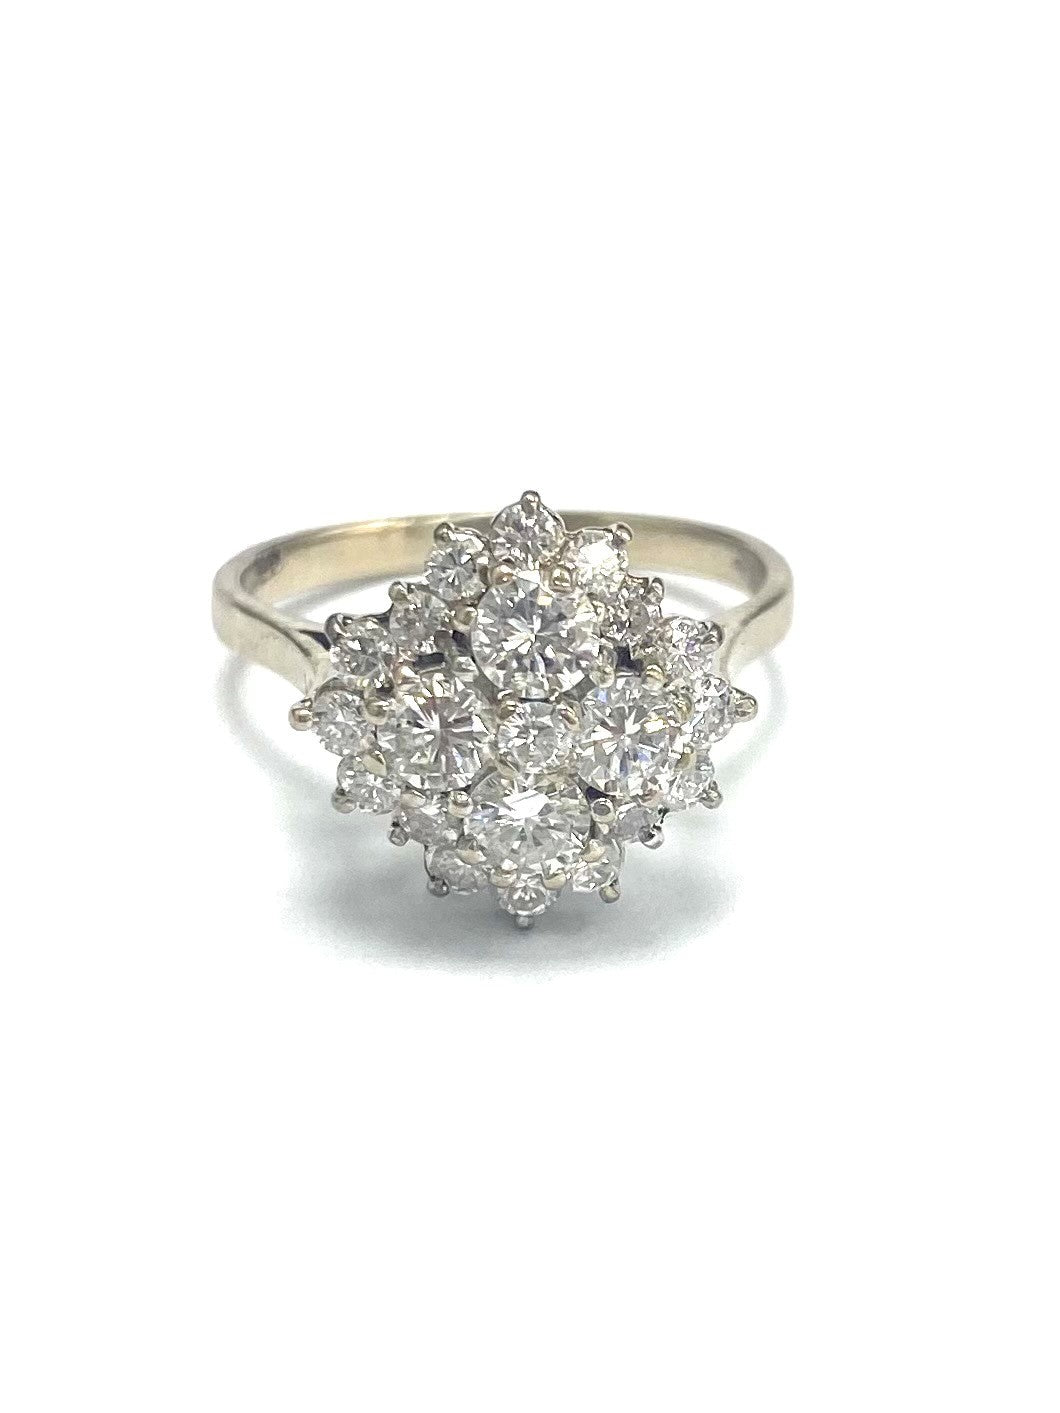 18ct White Gold 1.48cts Diamond Cluster Ring